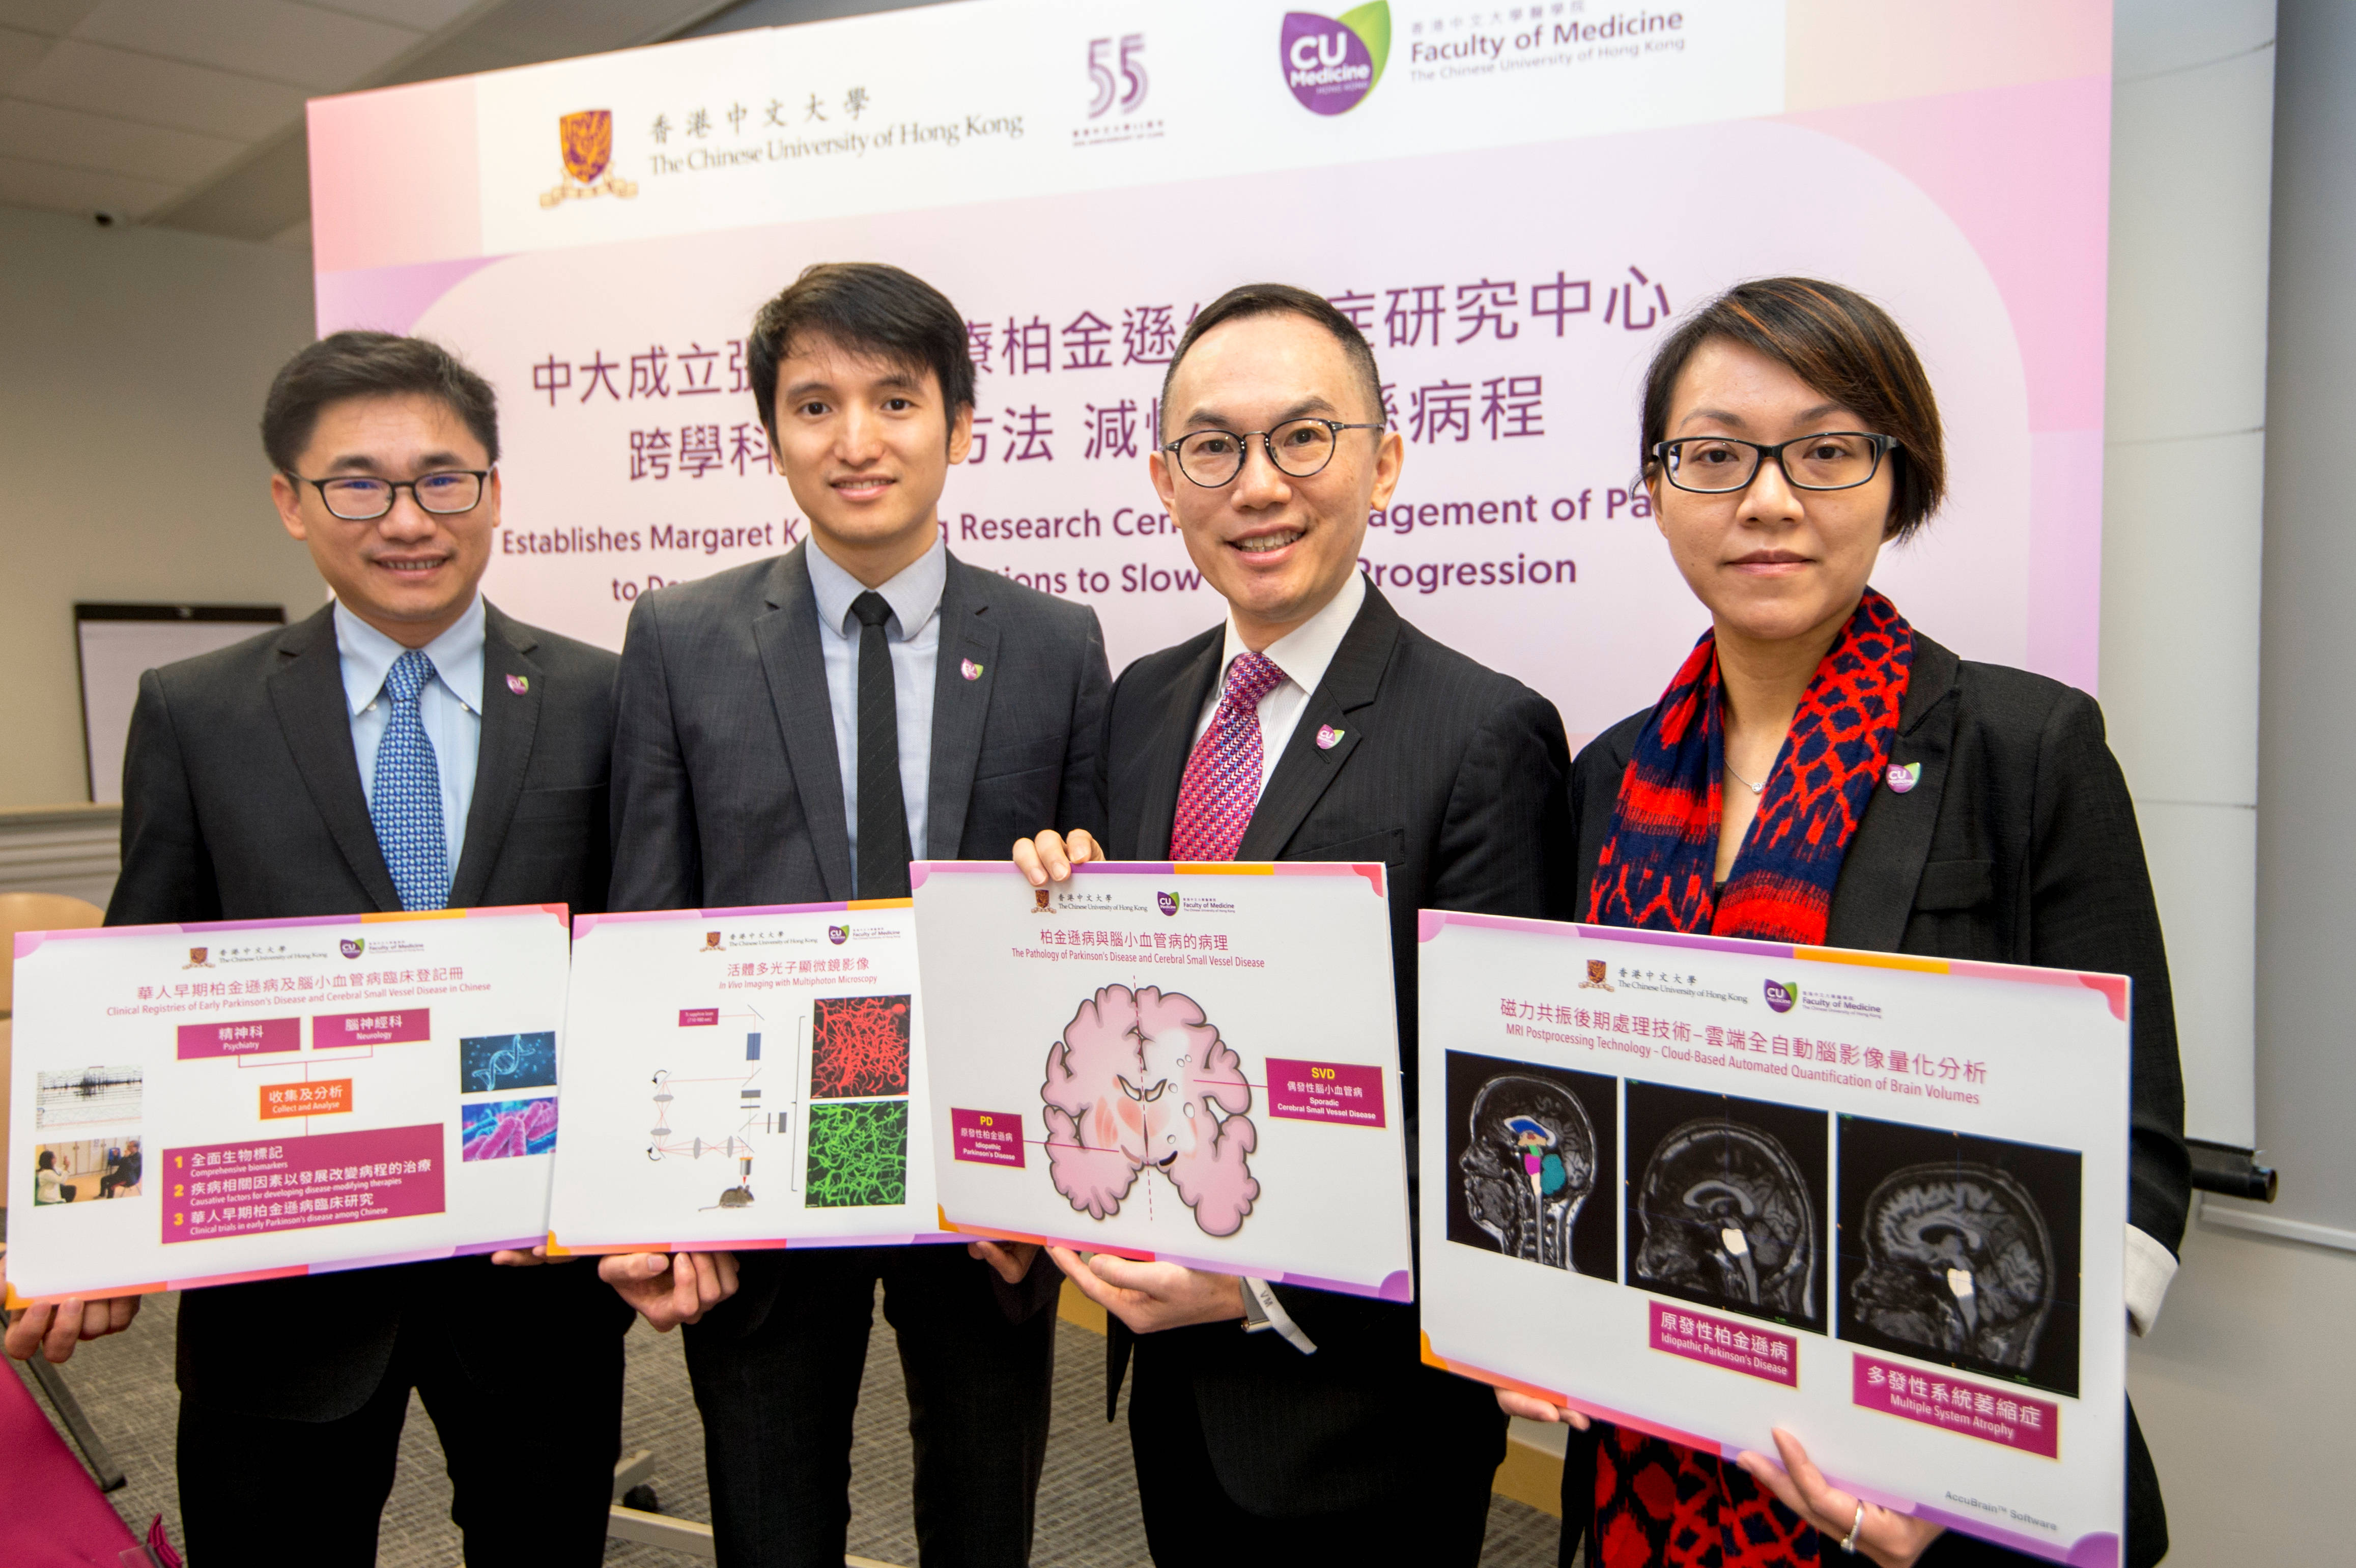 The Faculty of Medicine at CUHK establishes the Margaret K.L. Cheung Research Centre for Management of Parkinsonism to conduct transdisciplinary research that enables the discovery of therapeutics for preventing or slowing the progression of parkinsonism. 